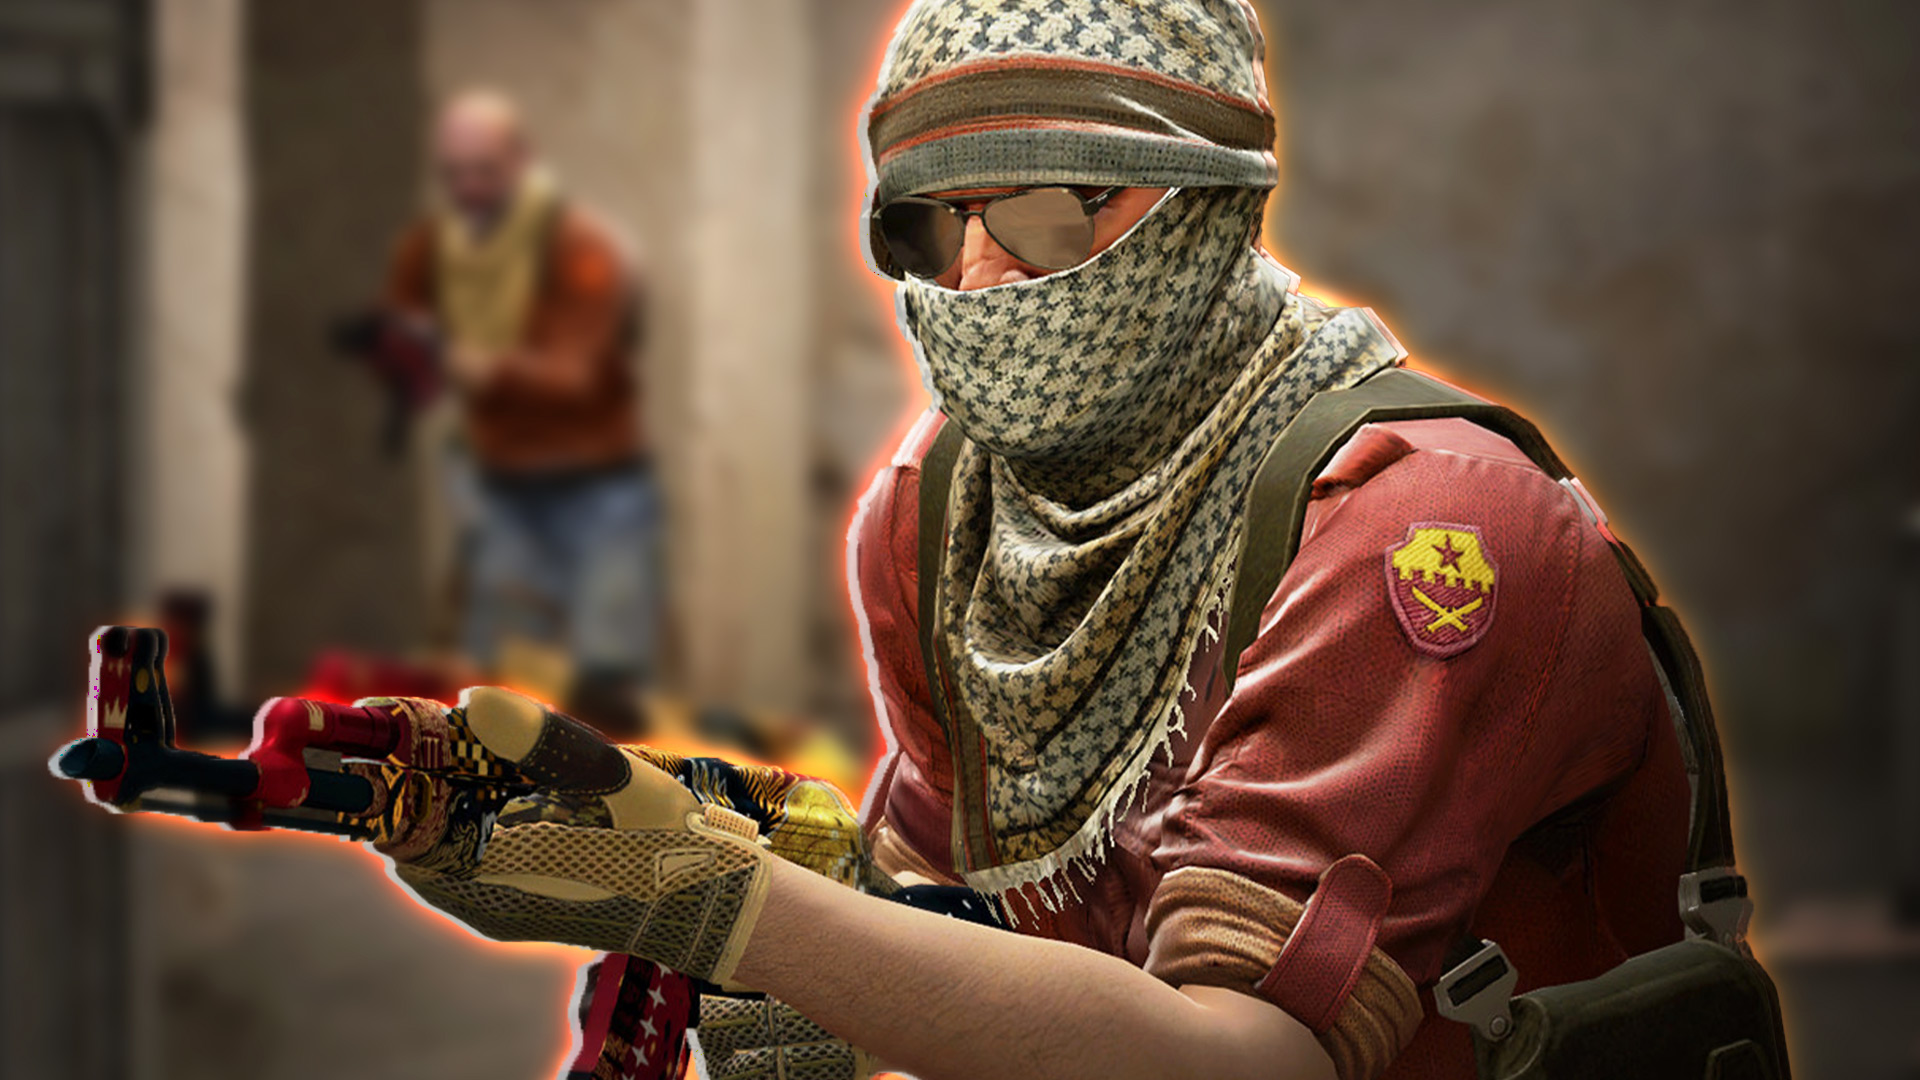 Counter Strike 2: Everything we know so far